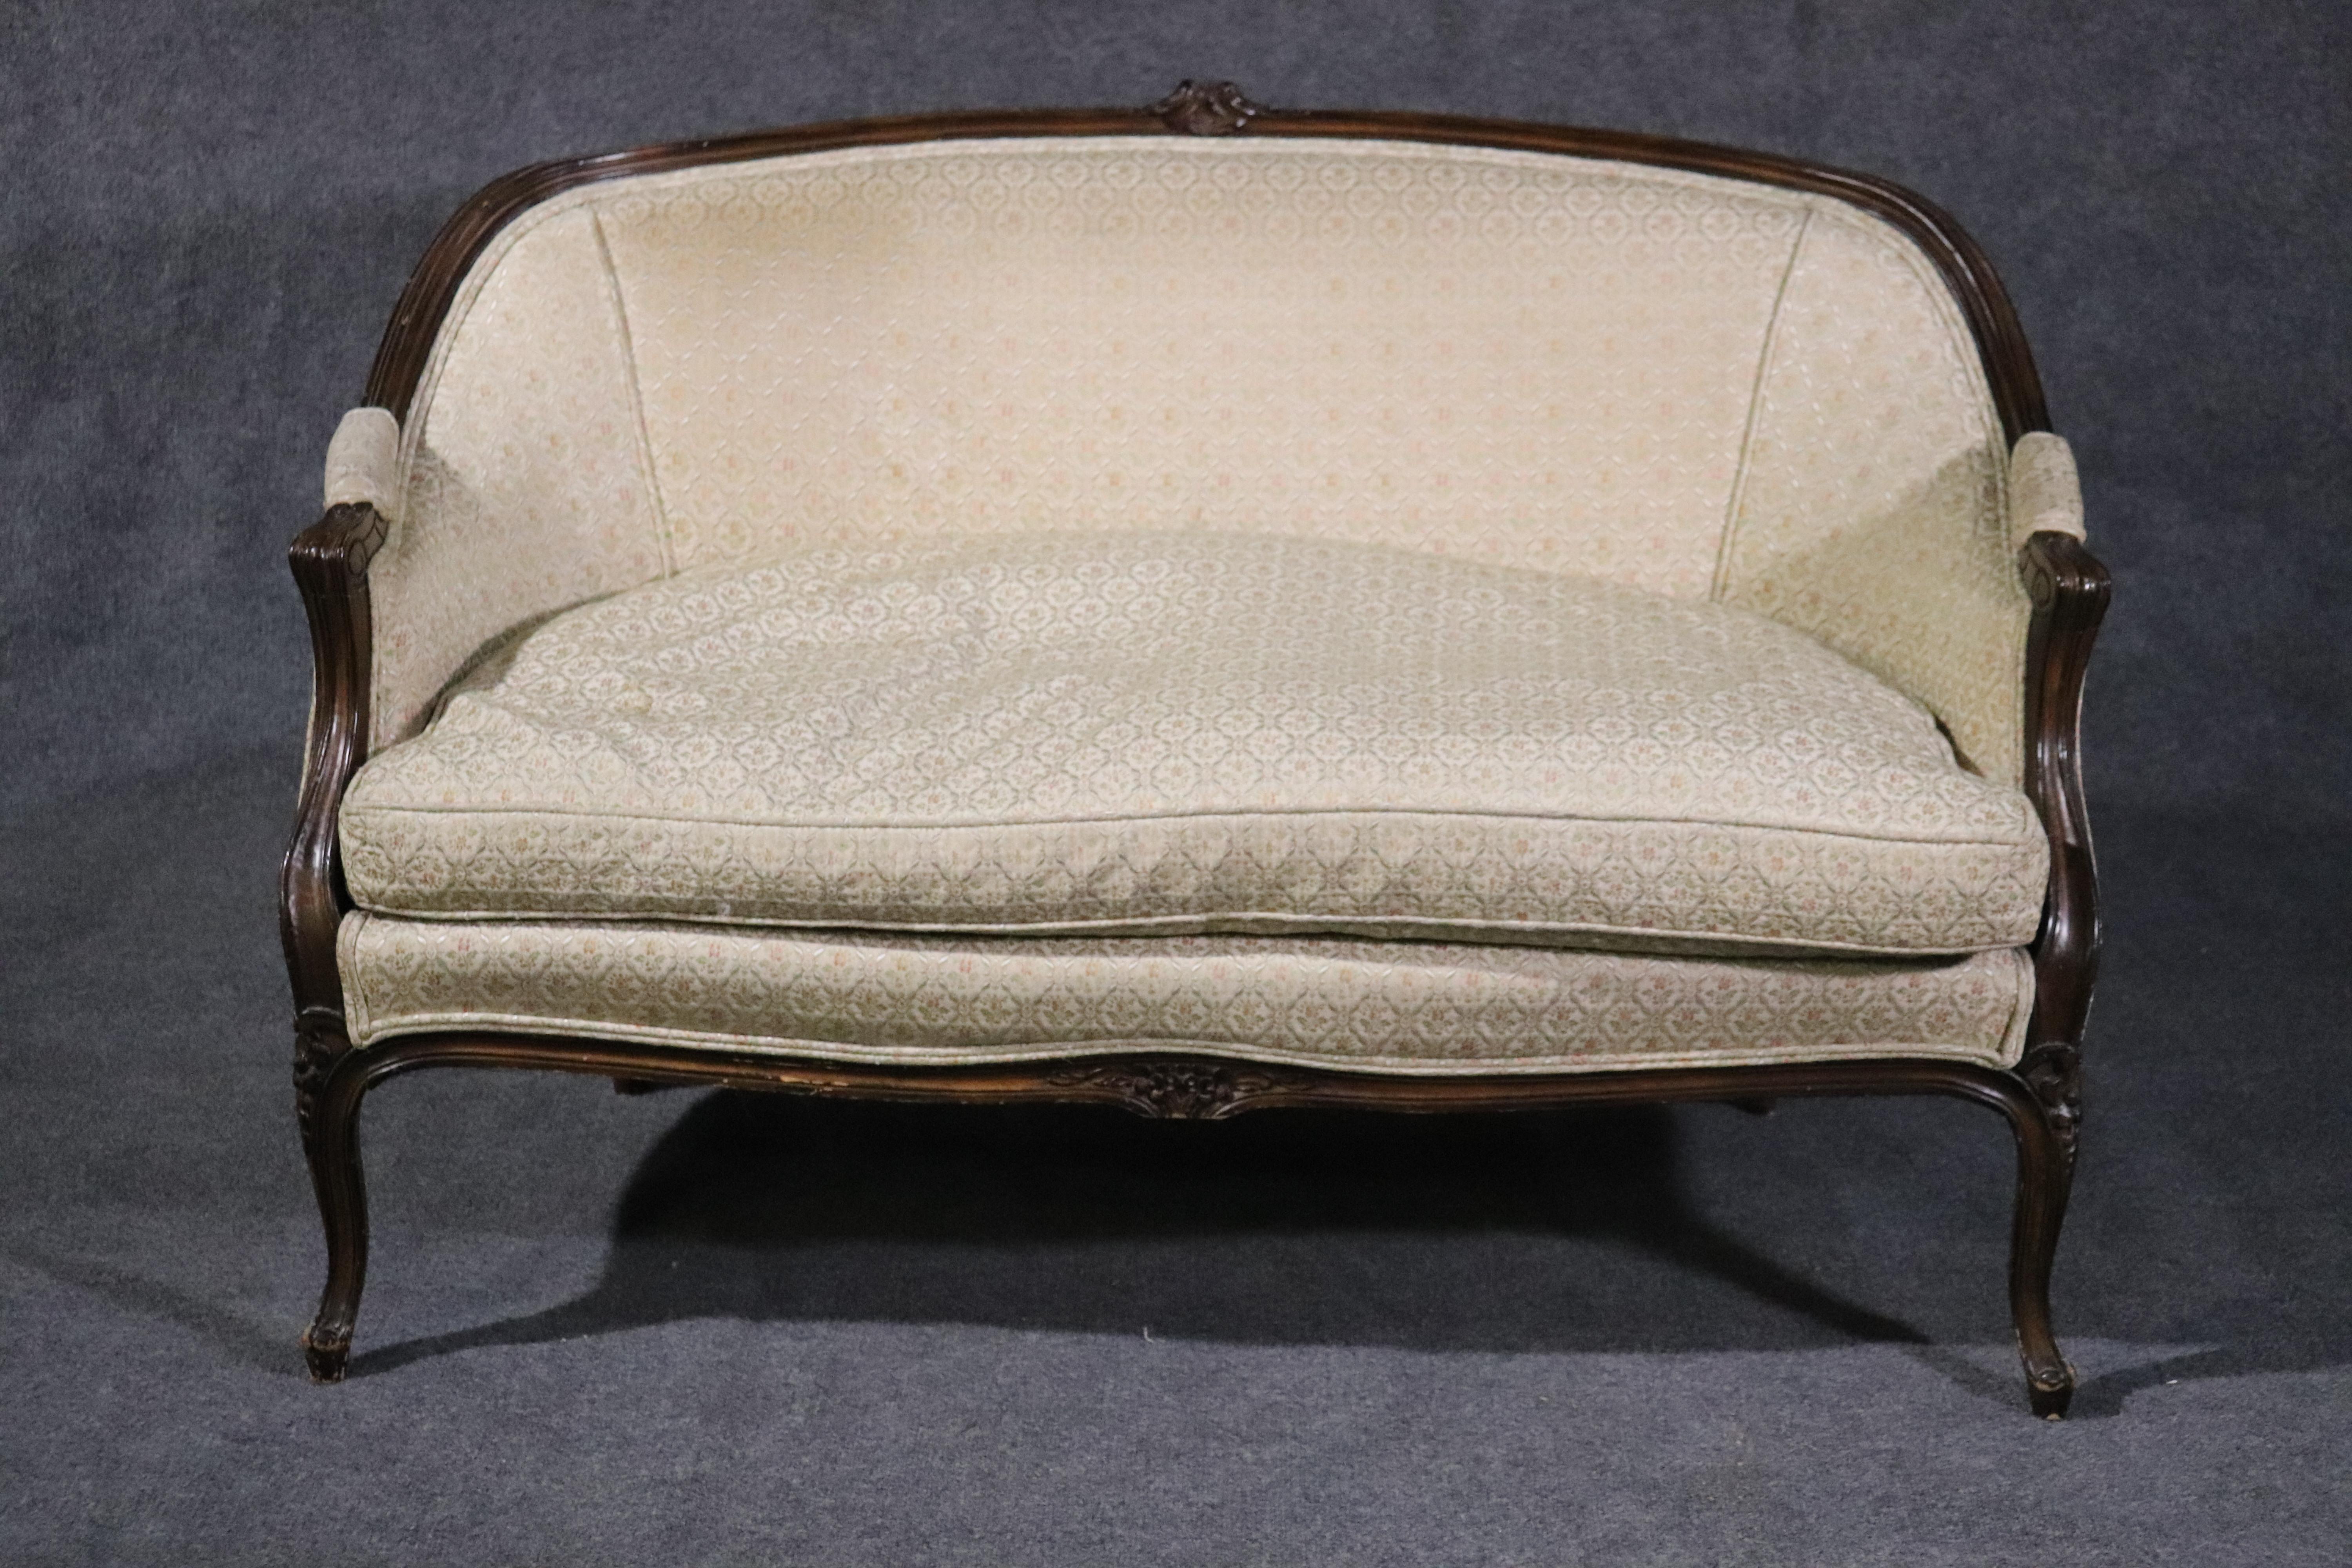 This is a nice little French Louis XV style walnut canapé. Made in the USA, this one has a nice and very comfortable goose feather filled cushion. The upholstery is used and 70 years old so expect some issues, but its frame is very nice. The settee